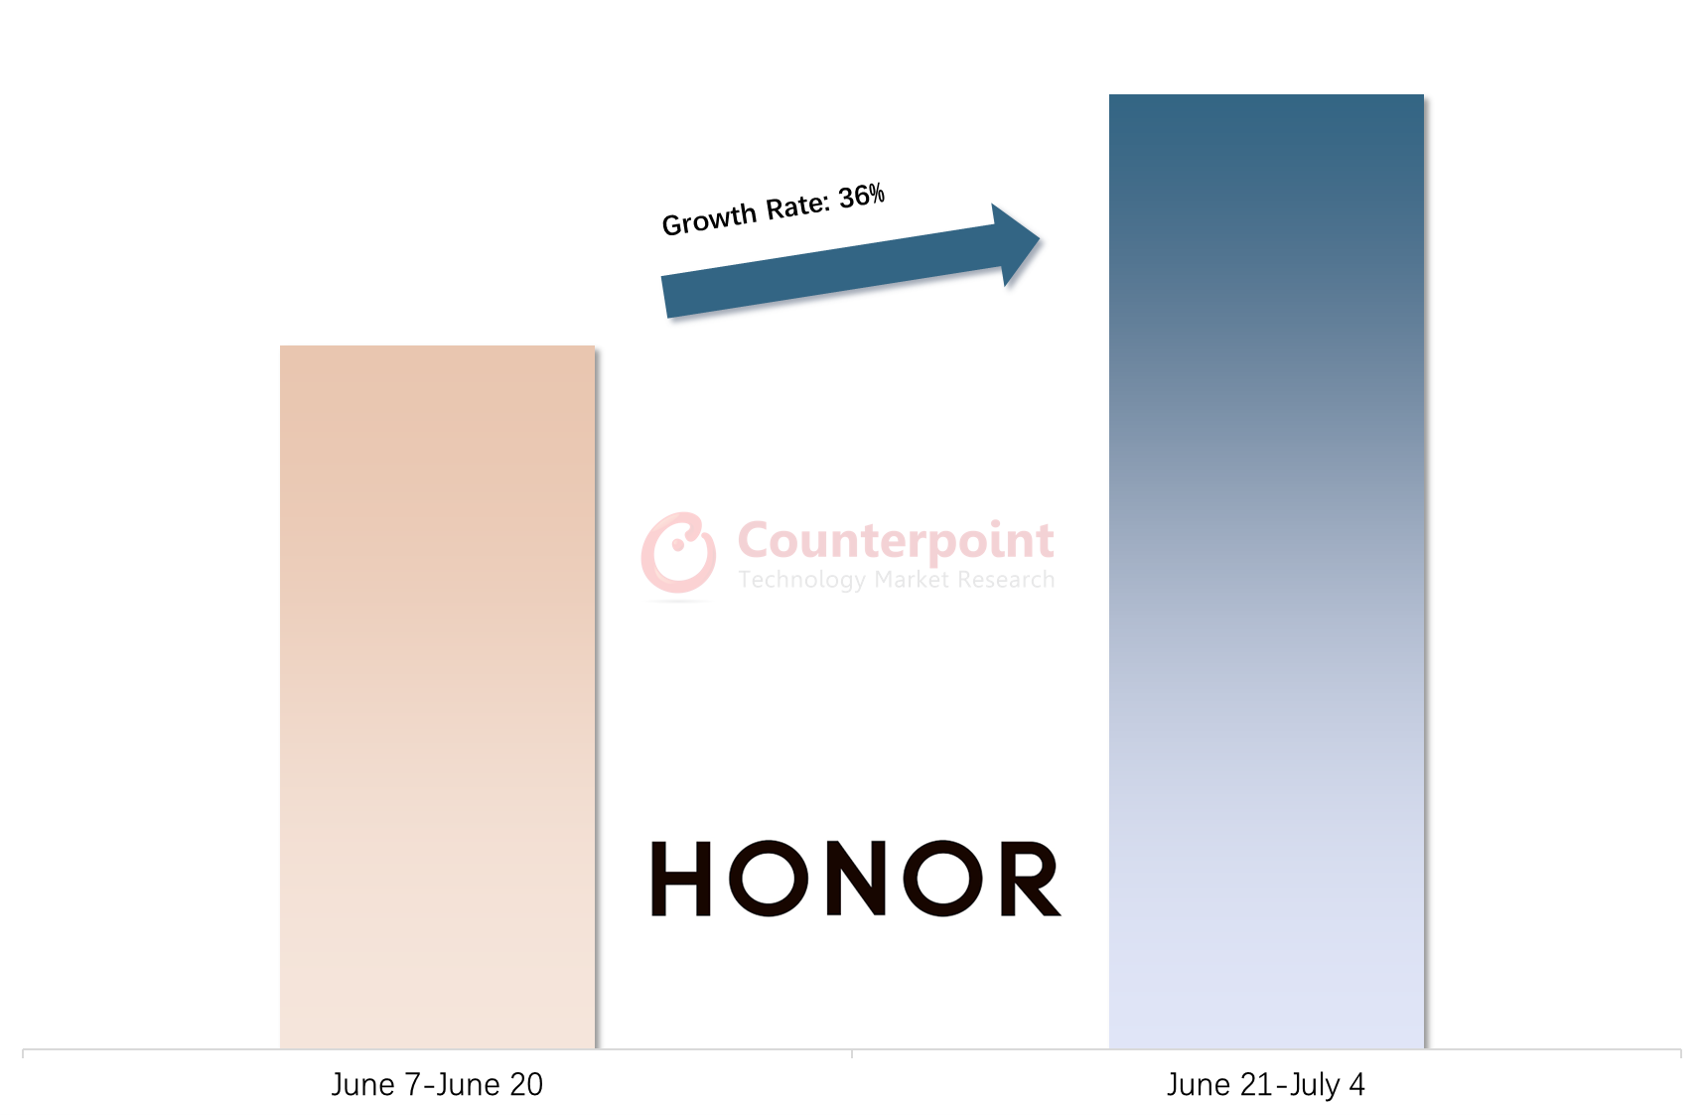 Counterpoint Research HONOR Growth Rate